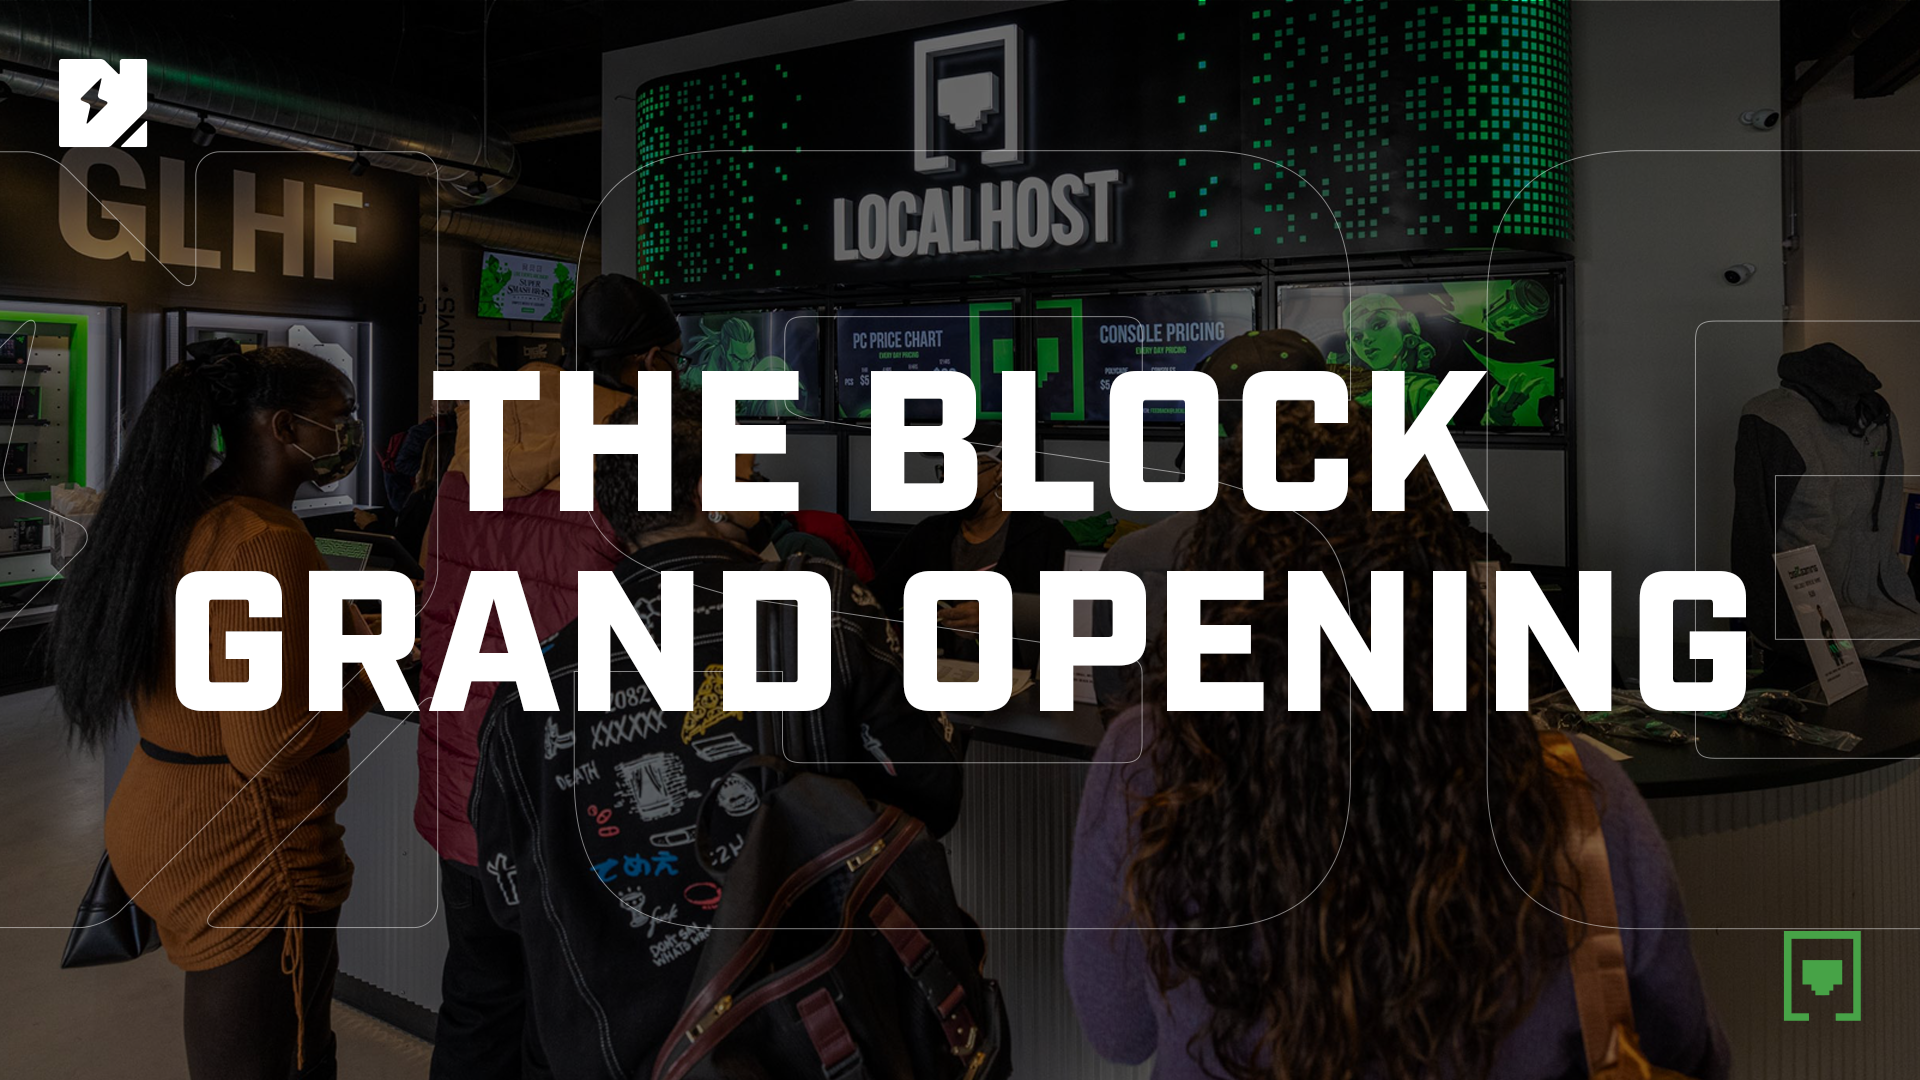 The Block cultivates opportunities around education and careers in esports; opens to the public on Saturday, November 13.